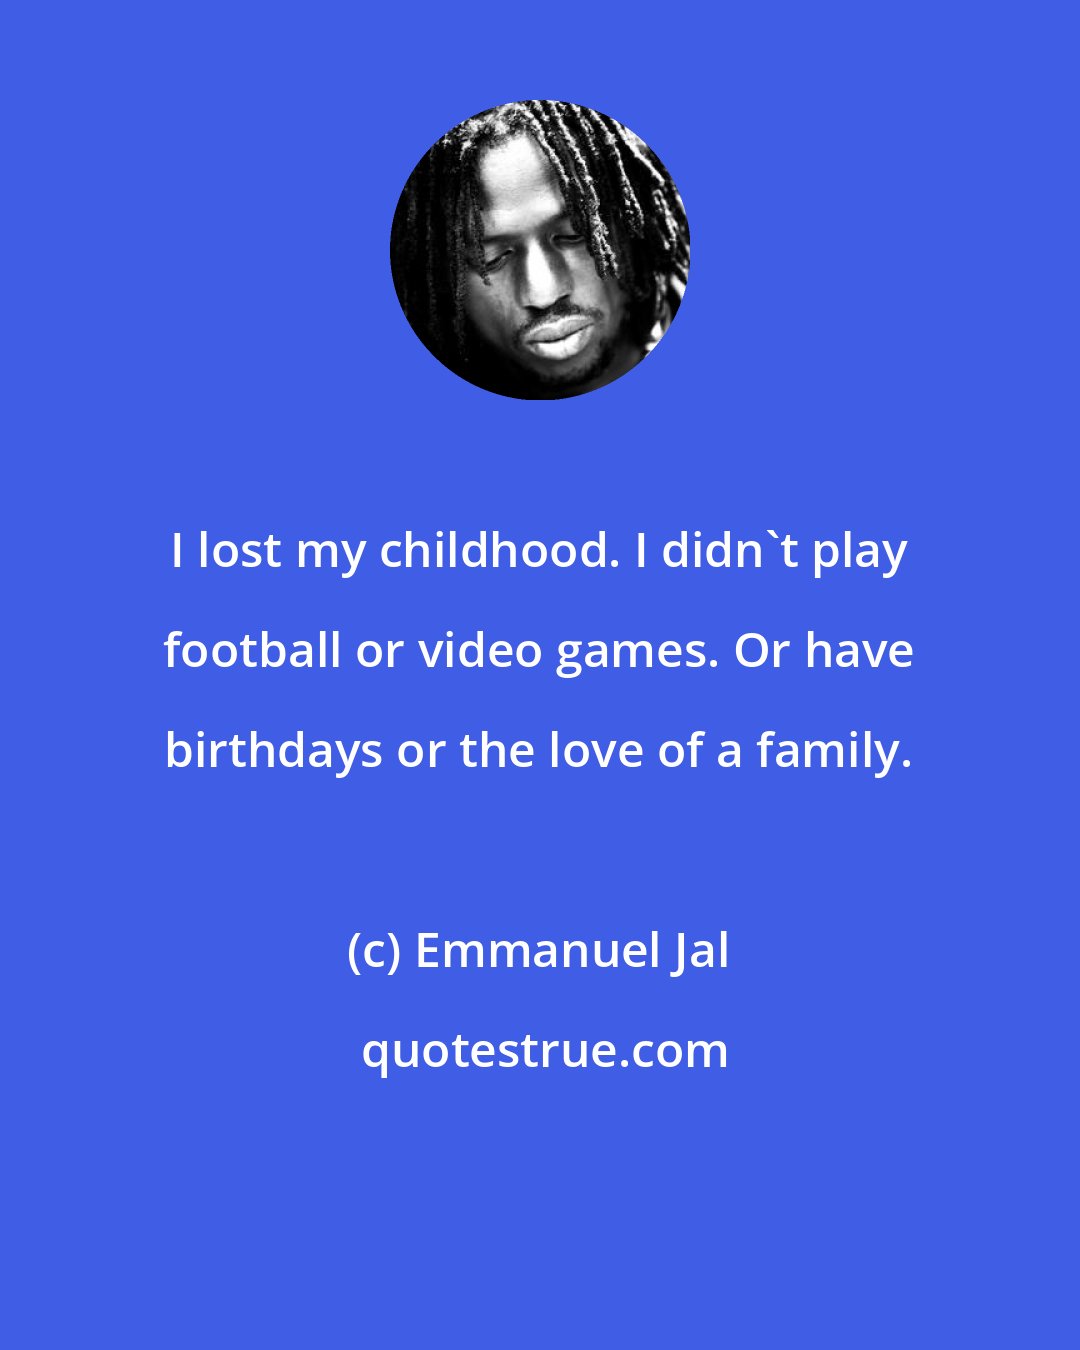 Emmanuel Jal: I lost my childhood. I didn't play football or video games. Or have birthdays or the love of a family.